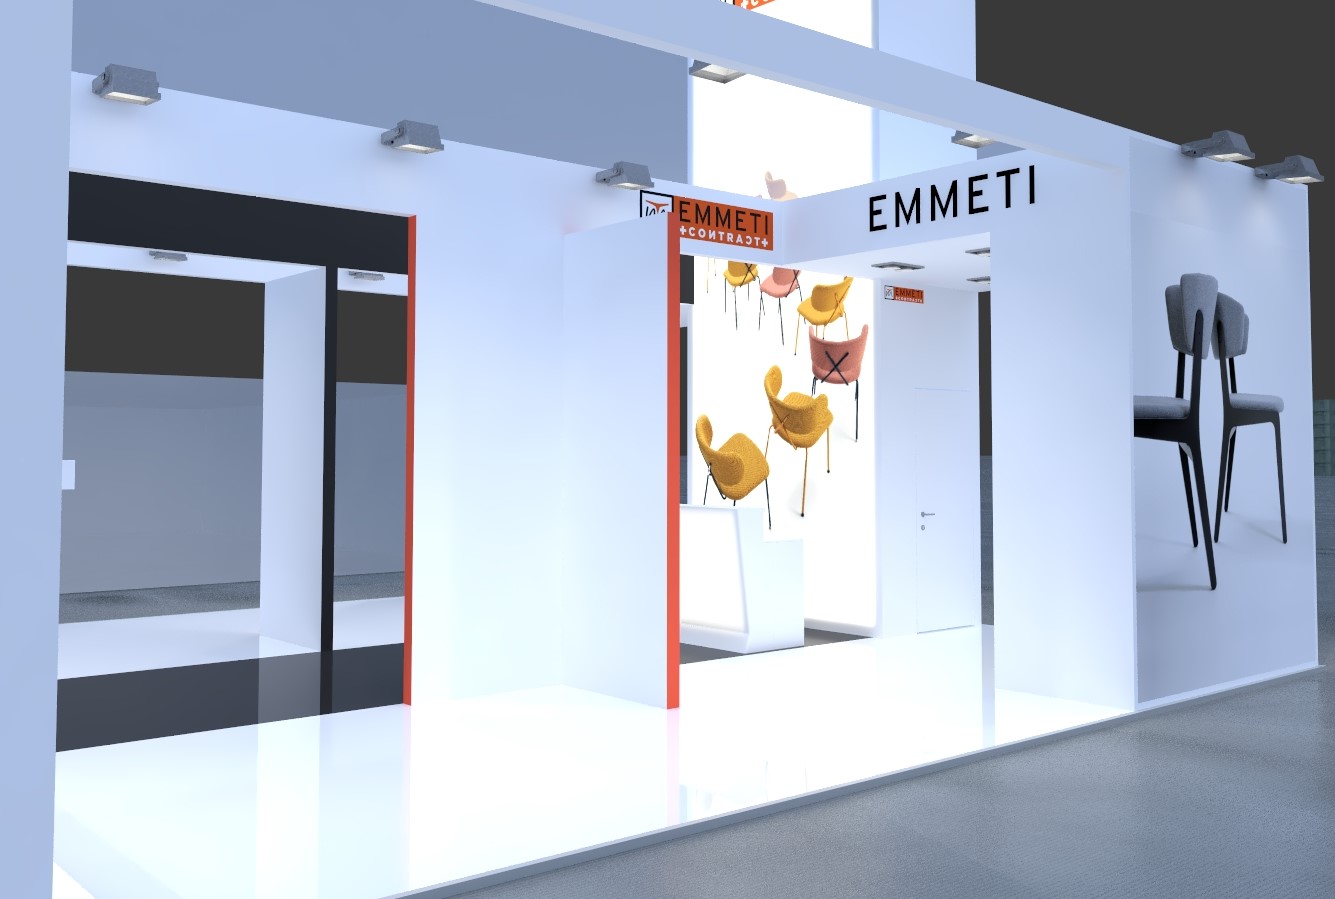 Progetto Emmeti - Sigep 2020